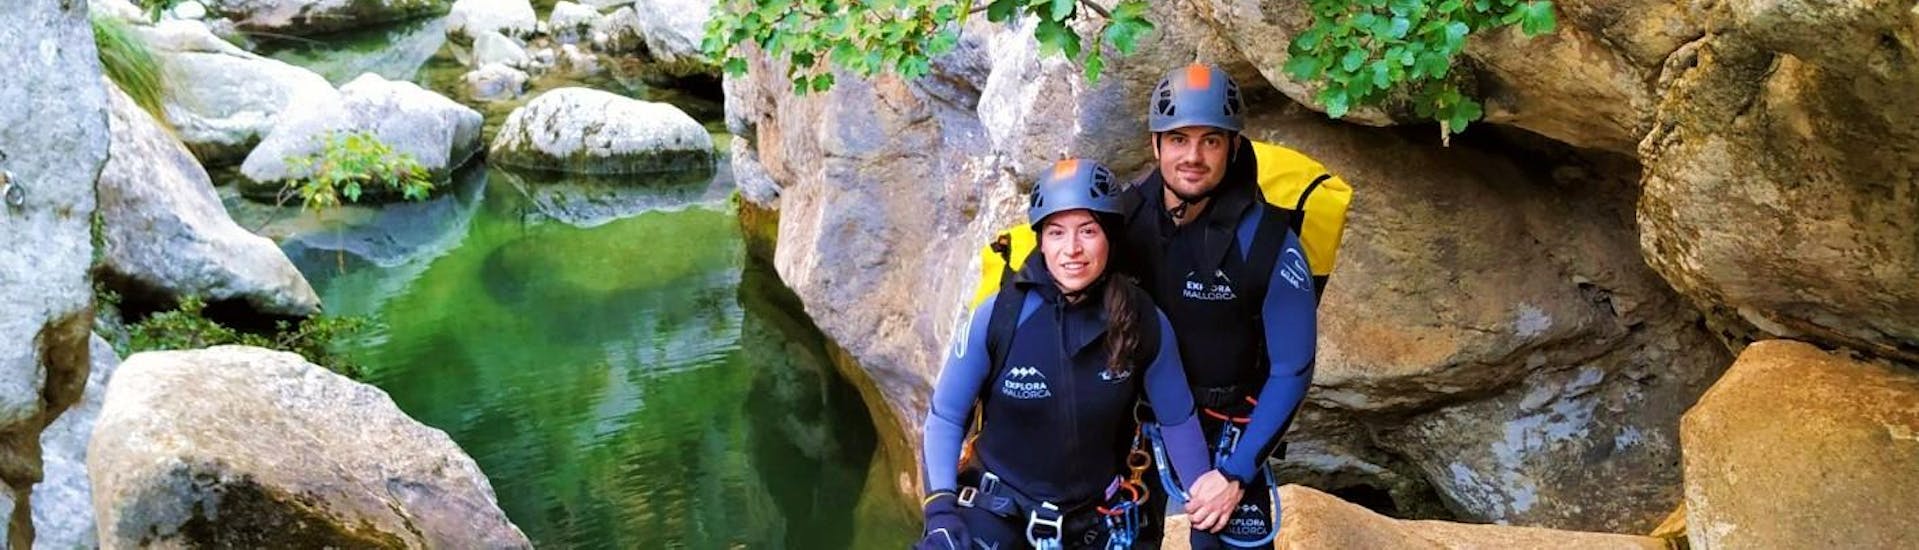 A couple enjoying during a day of Canyoning in Mallorca for Beginners with Explora Mallorca.